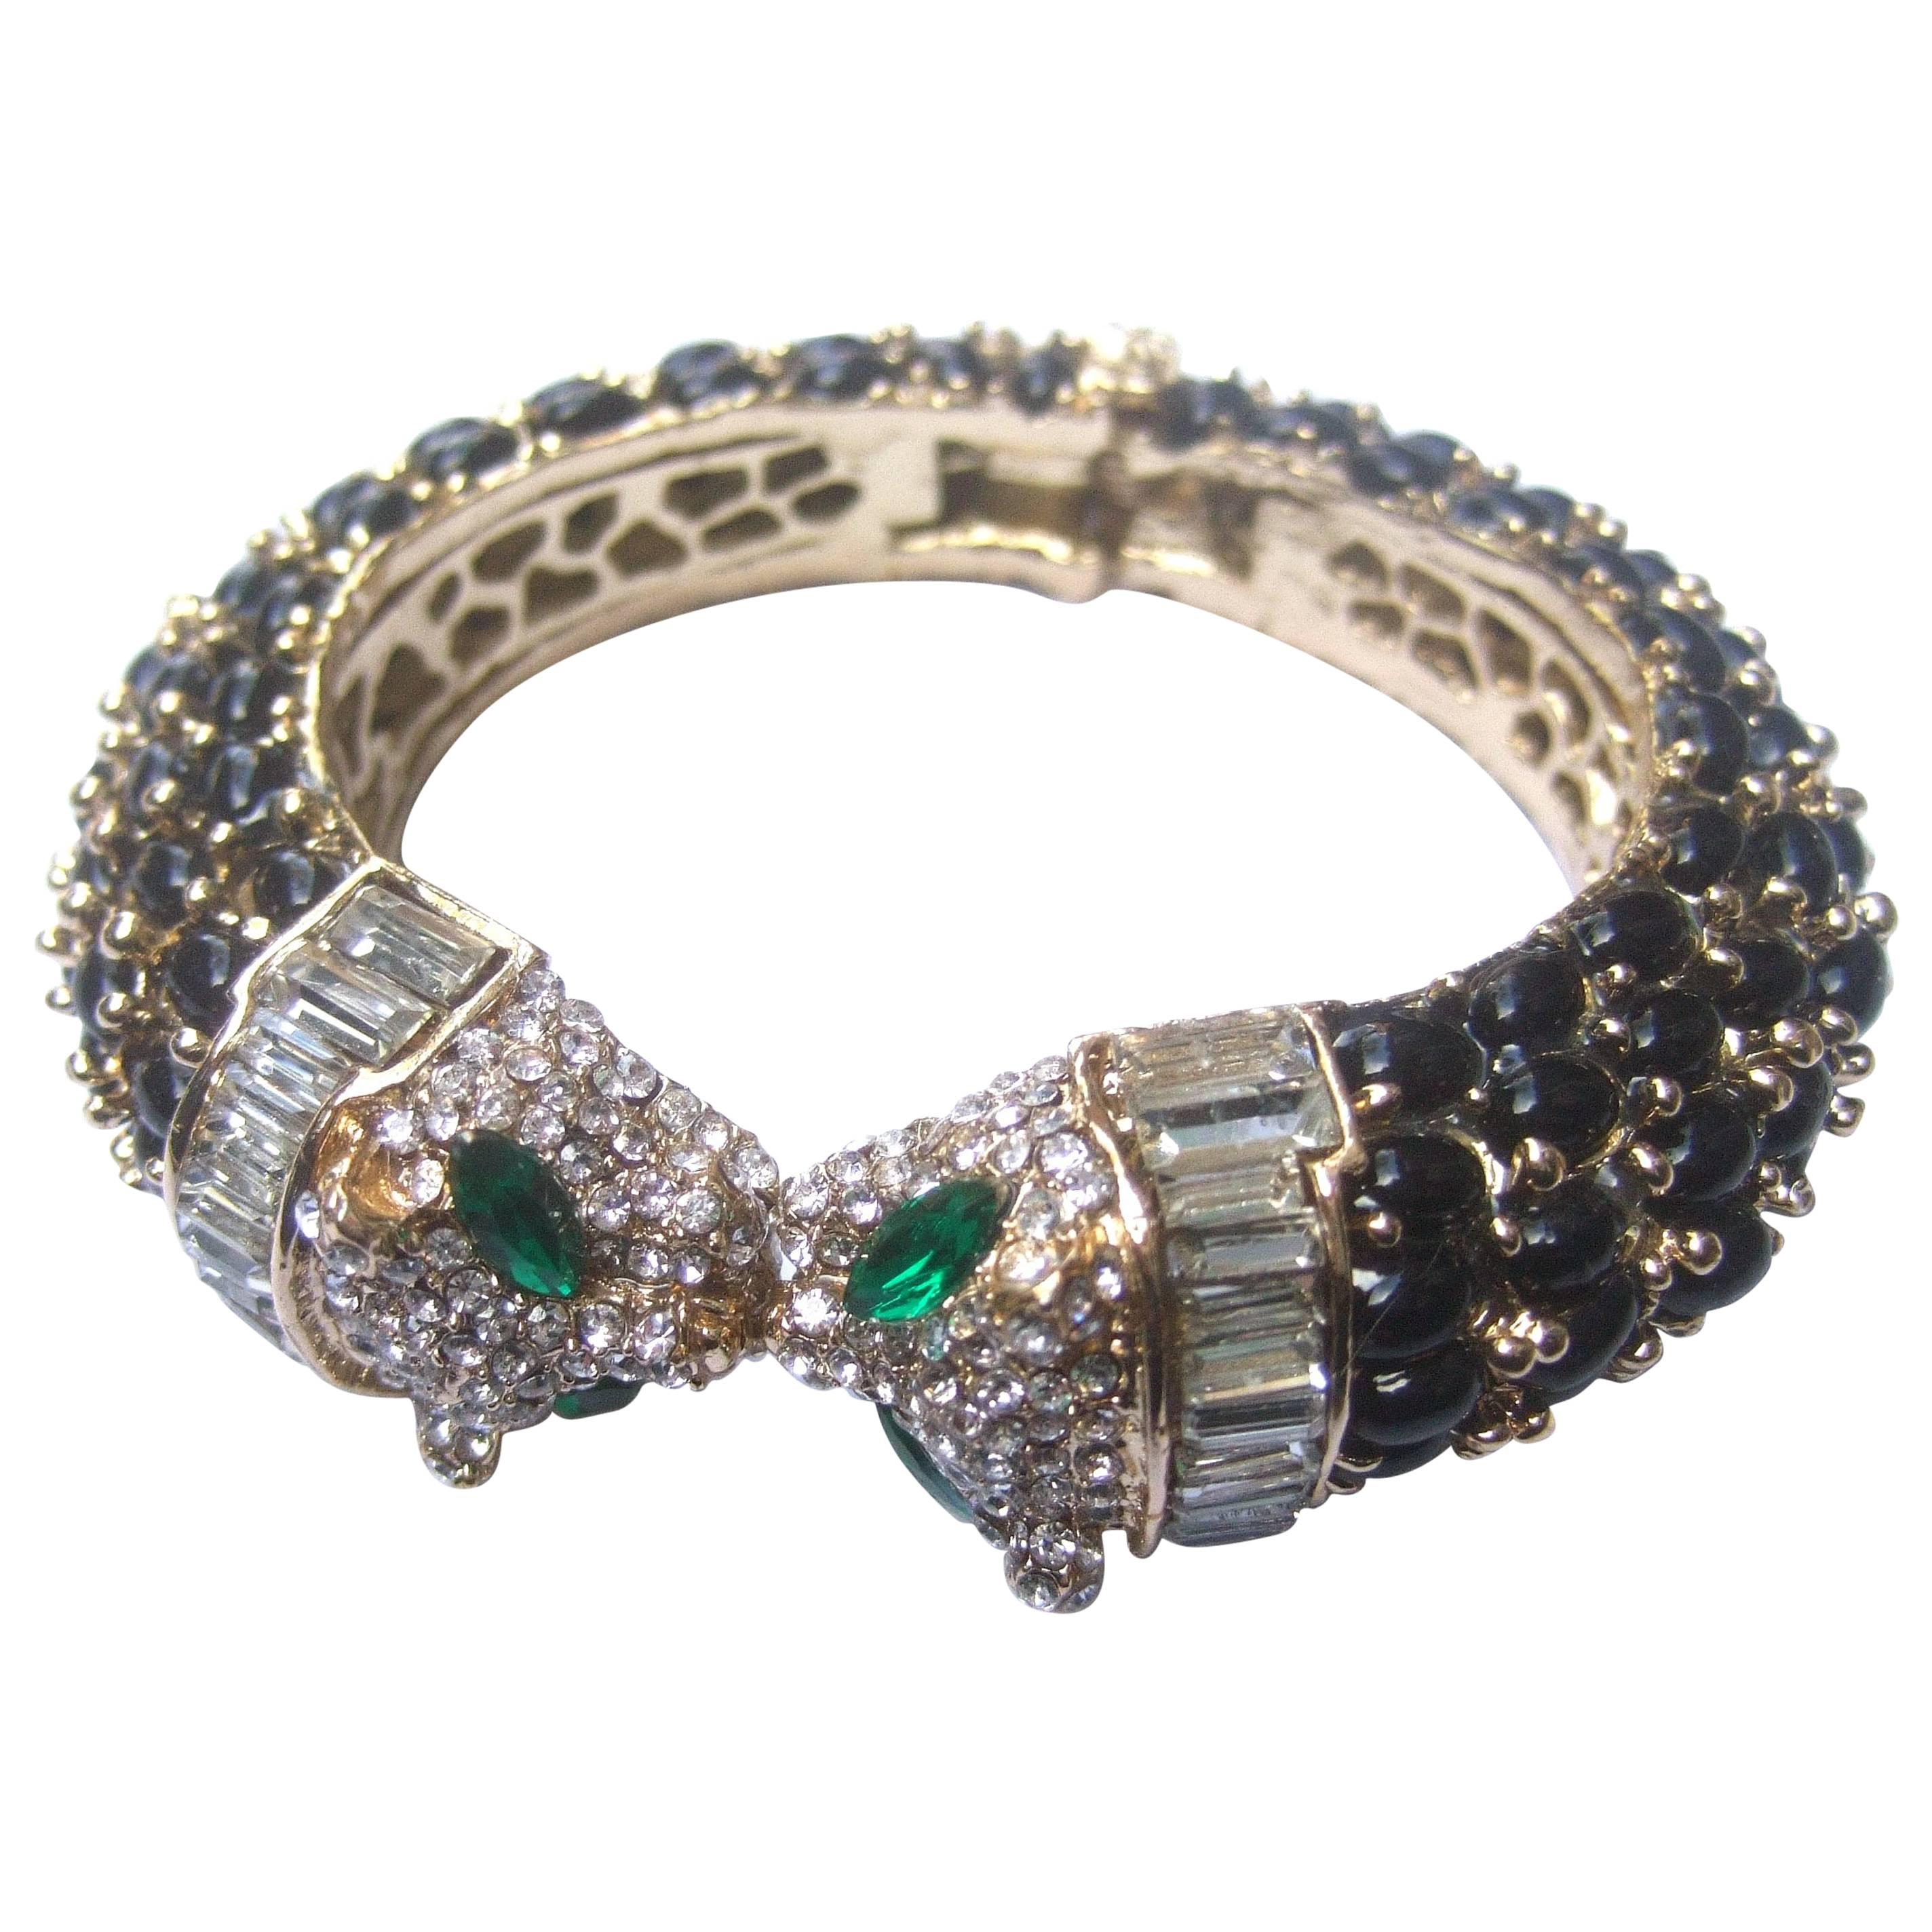 Crystal and Glass Jeweled Panther Bracelet, 21st Century